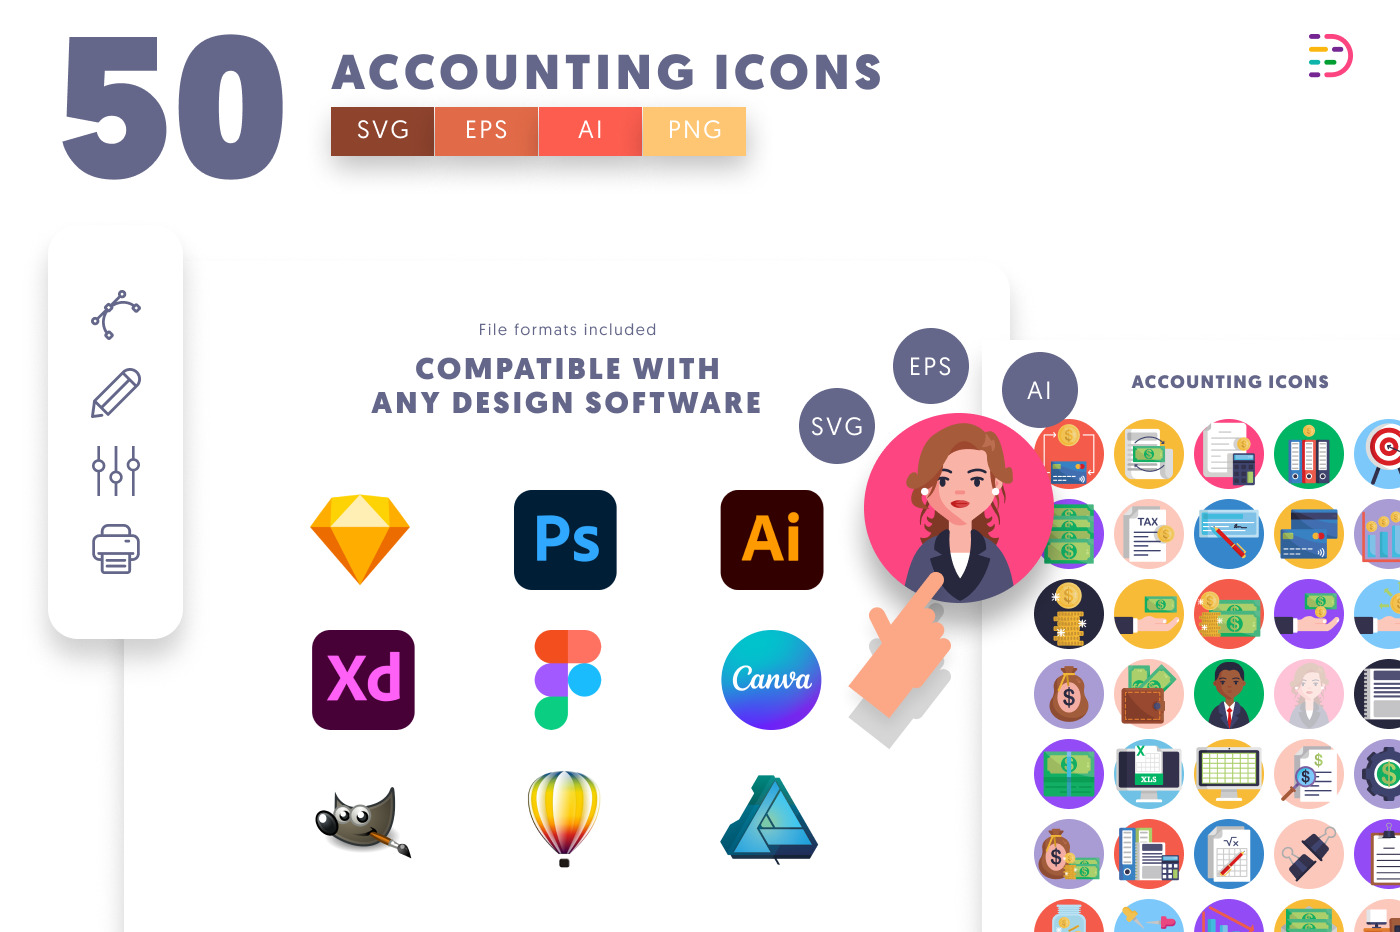  full vector Accounting Icons